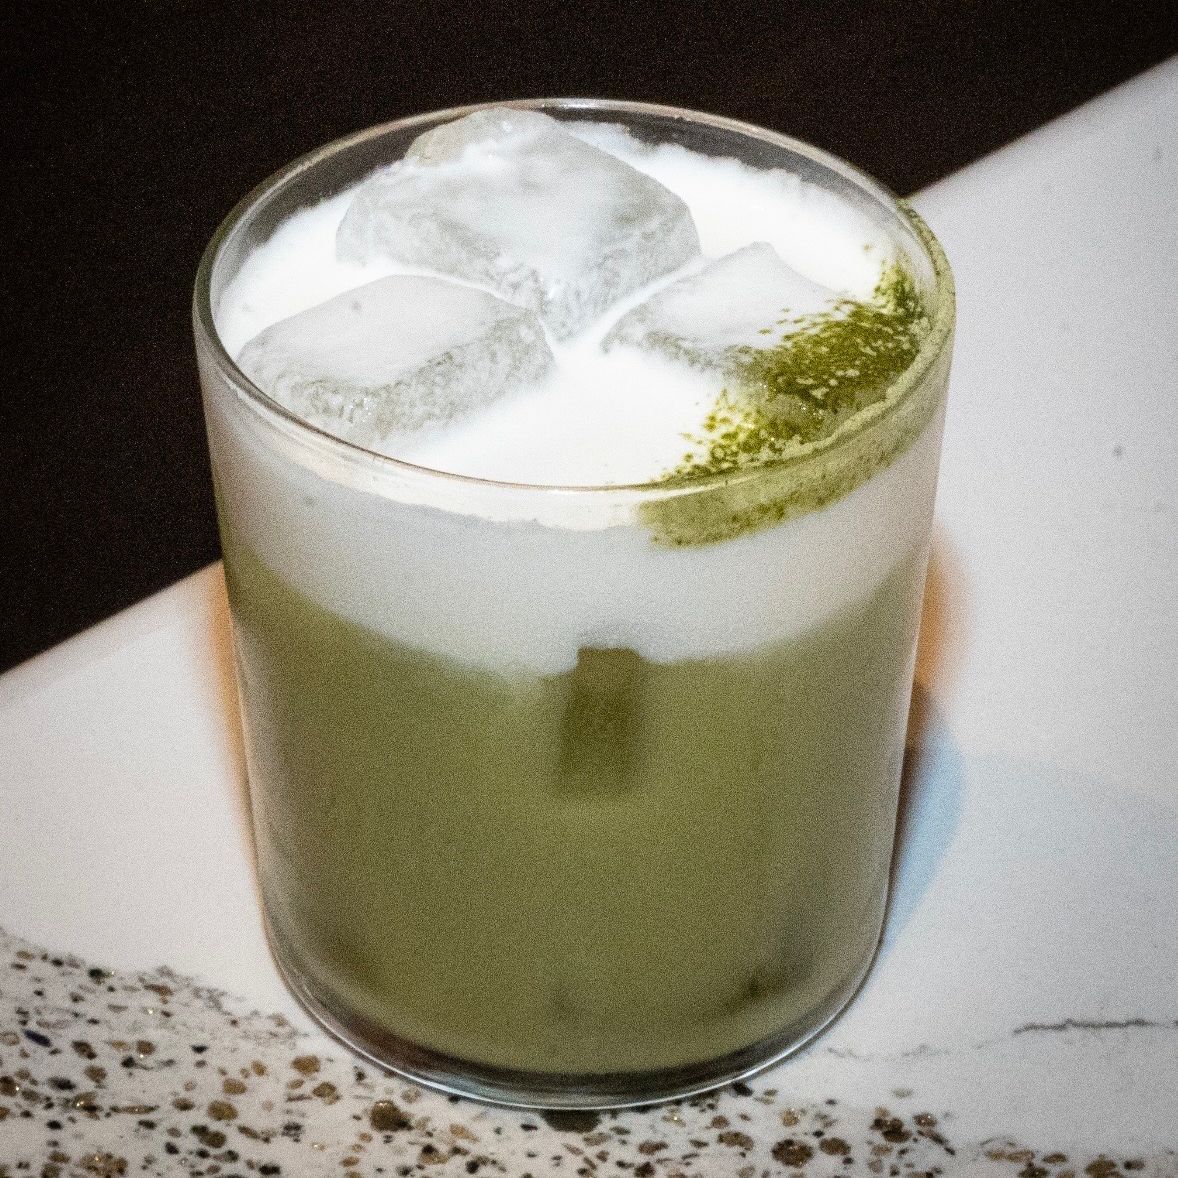 A cocktail inspired by the White Russian but add matcha and white cacao. Decadent but spirit forward, this matcha inspired riff on the original adds the perfect balance of chocolate and vanilla.